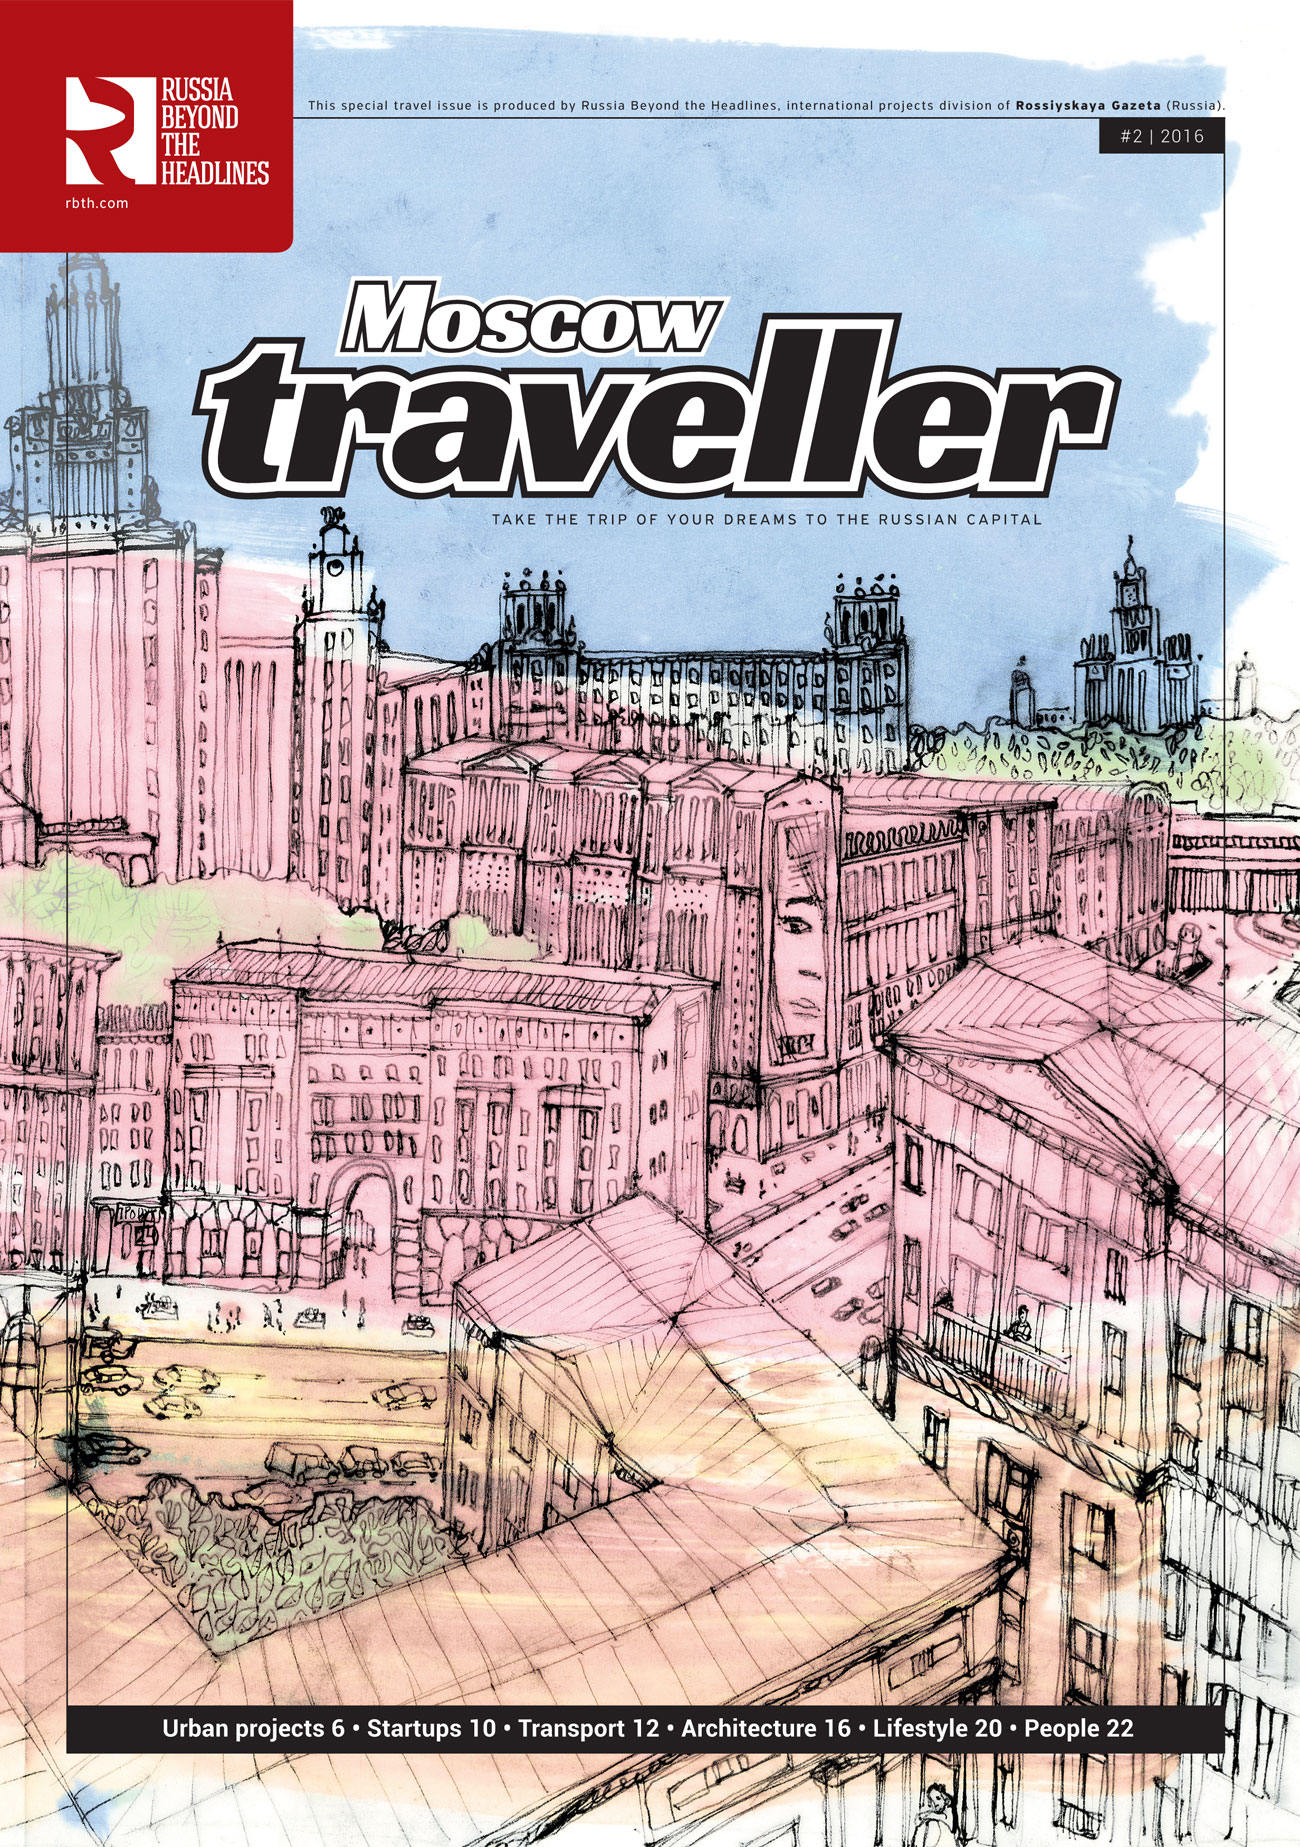 RBTH releases a special brochure – Moscow Traveller